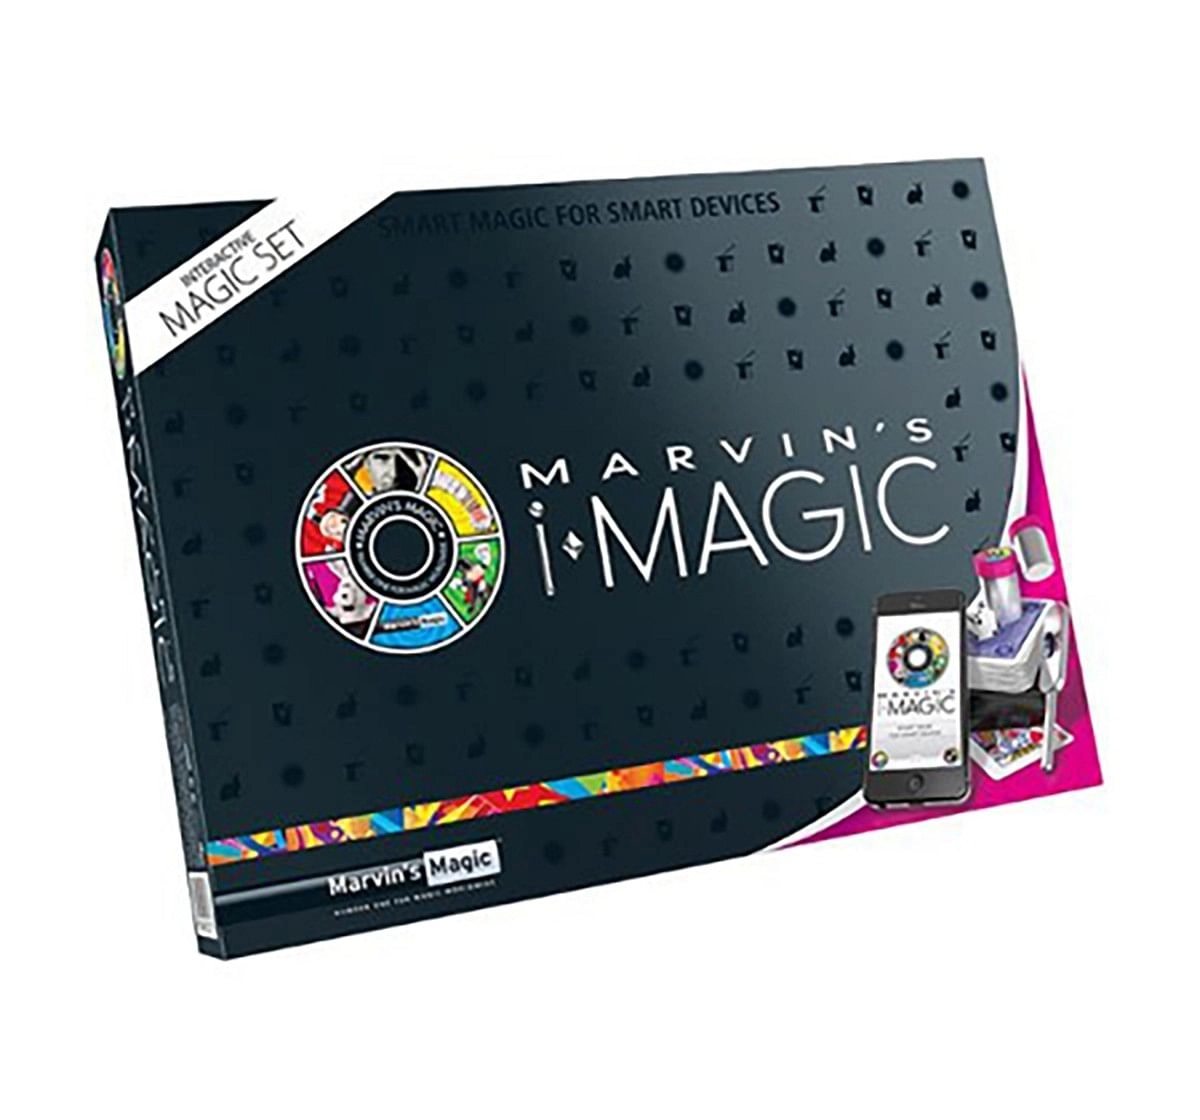 Marvin'S Magic Interactive Box Of Tri Impulse Toys for Kids age 5Y+ (Other)